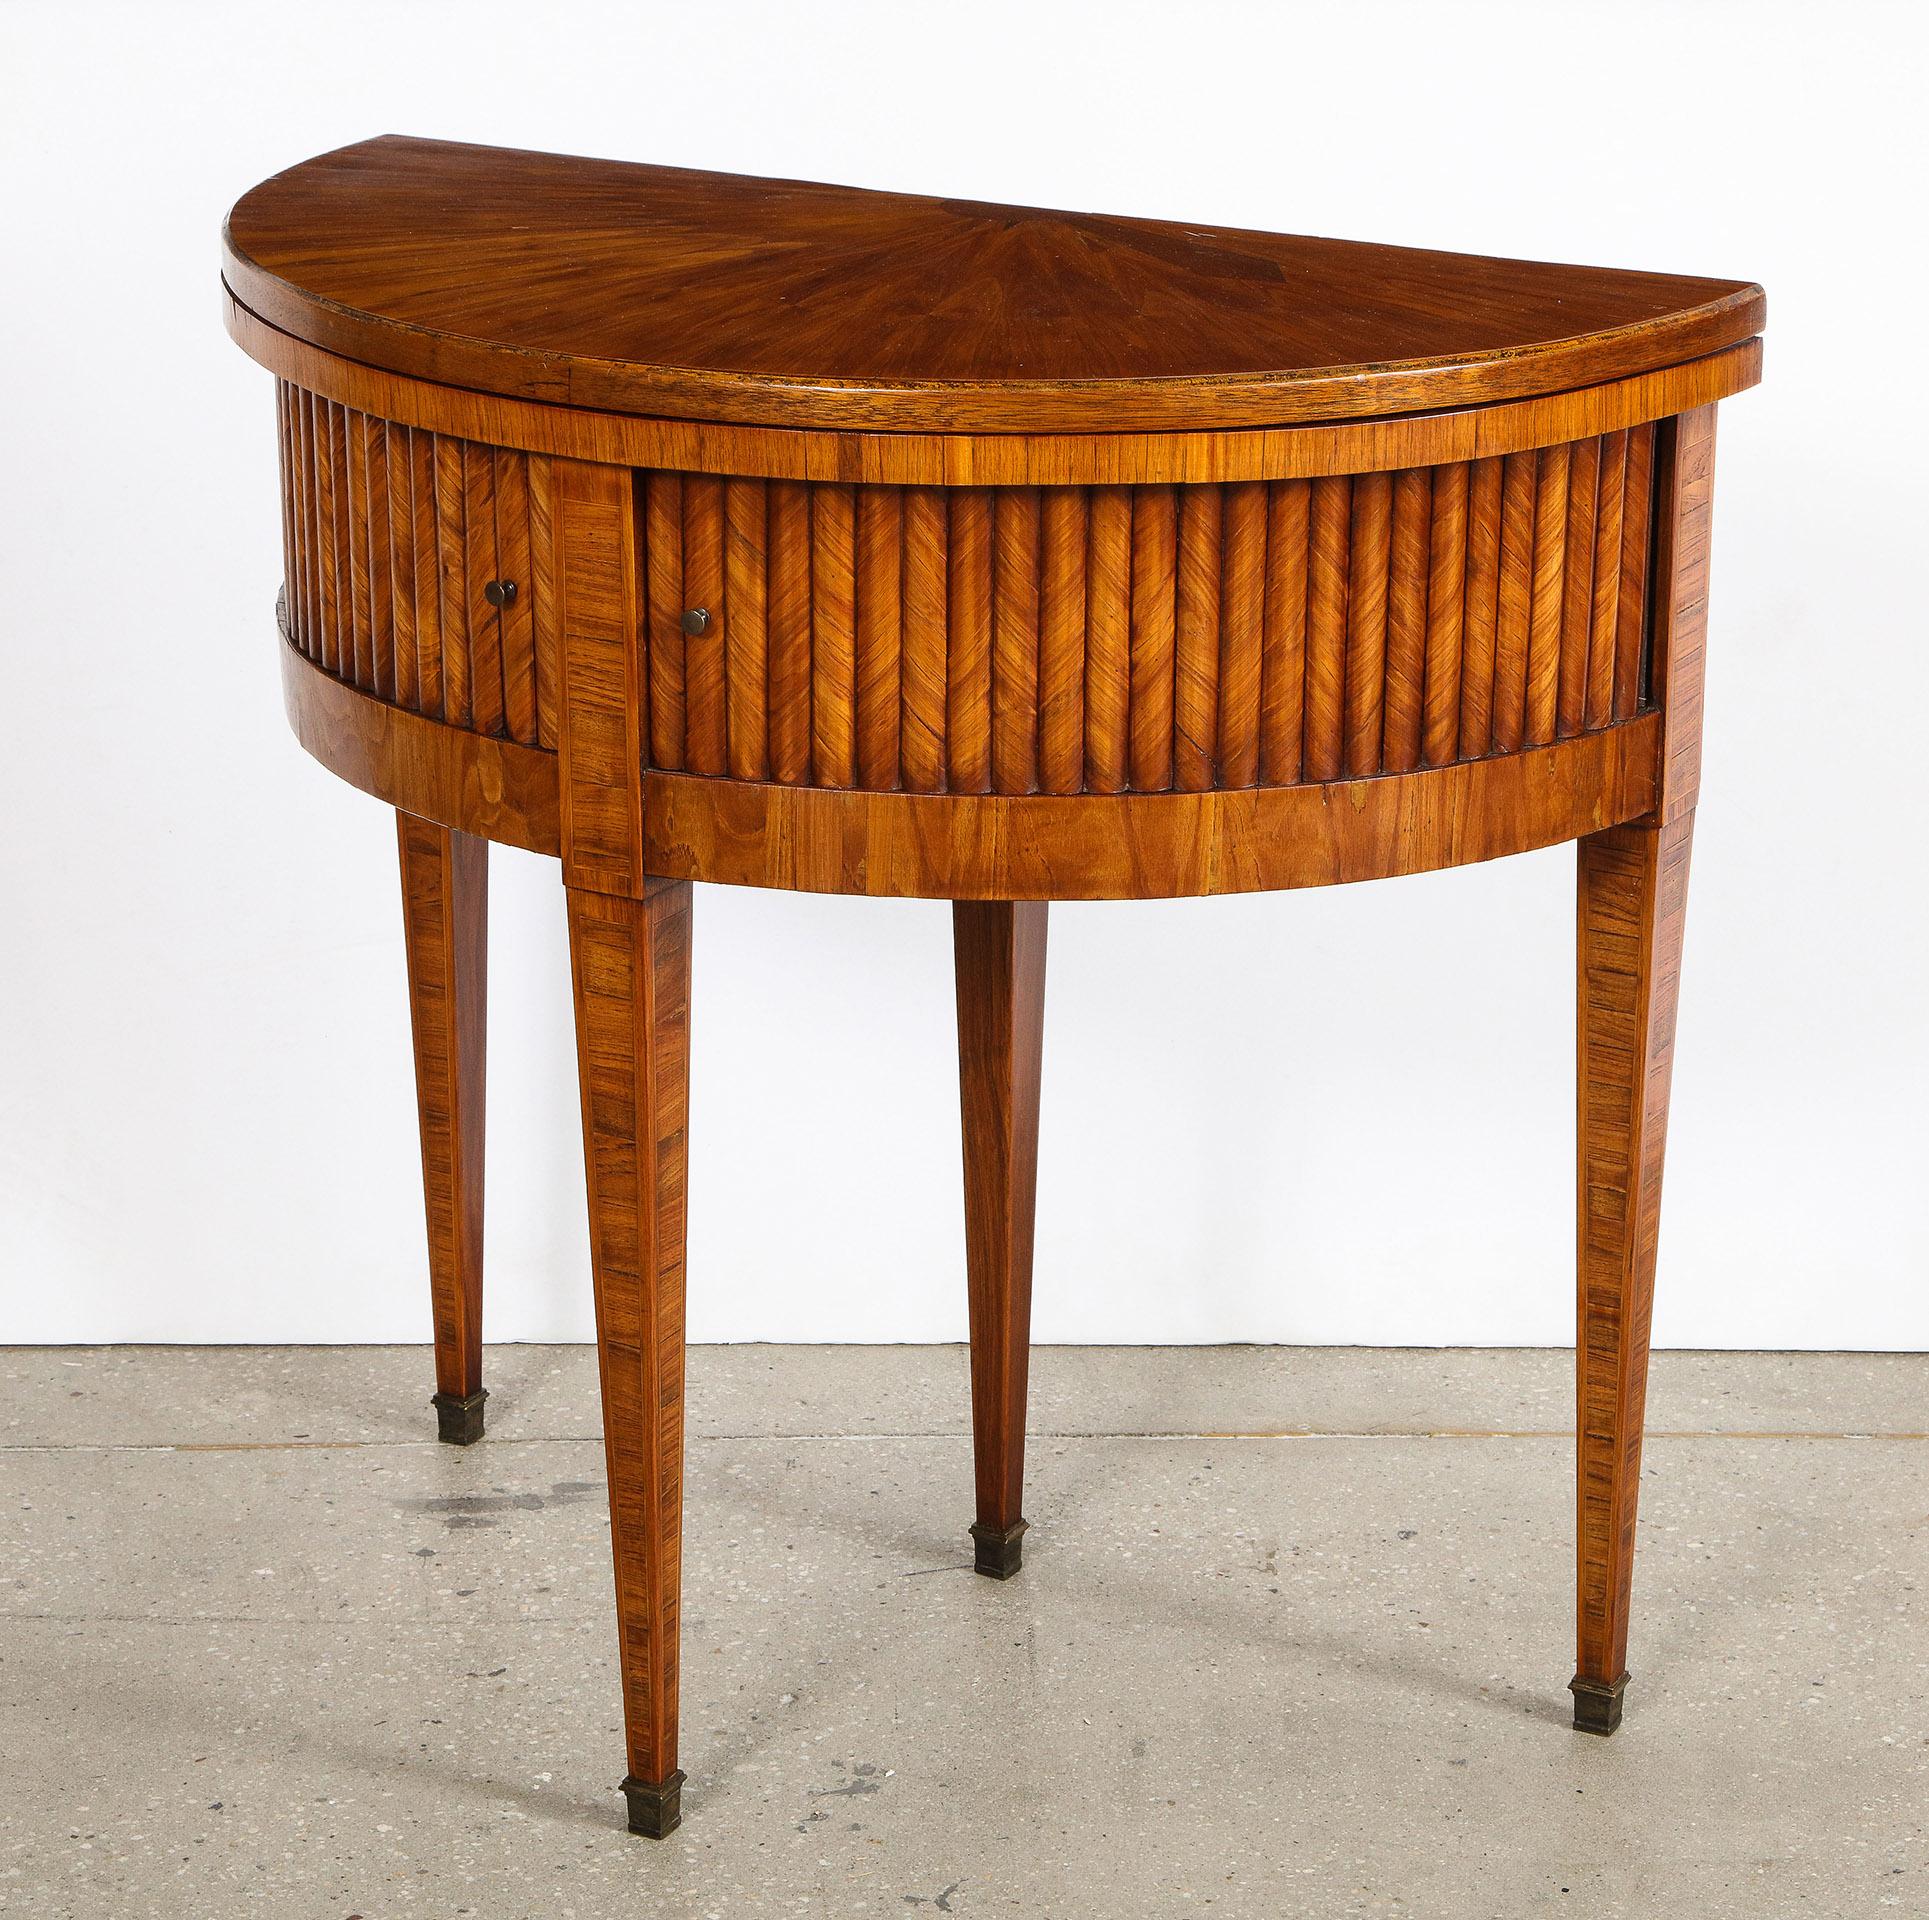 Tulip wood demilune game table

The tulip wood demilune table opening to a round felt lined playing surface, over matched tambour doors, over four tapered legs, the center back leg extending out to support the top when opened.